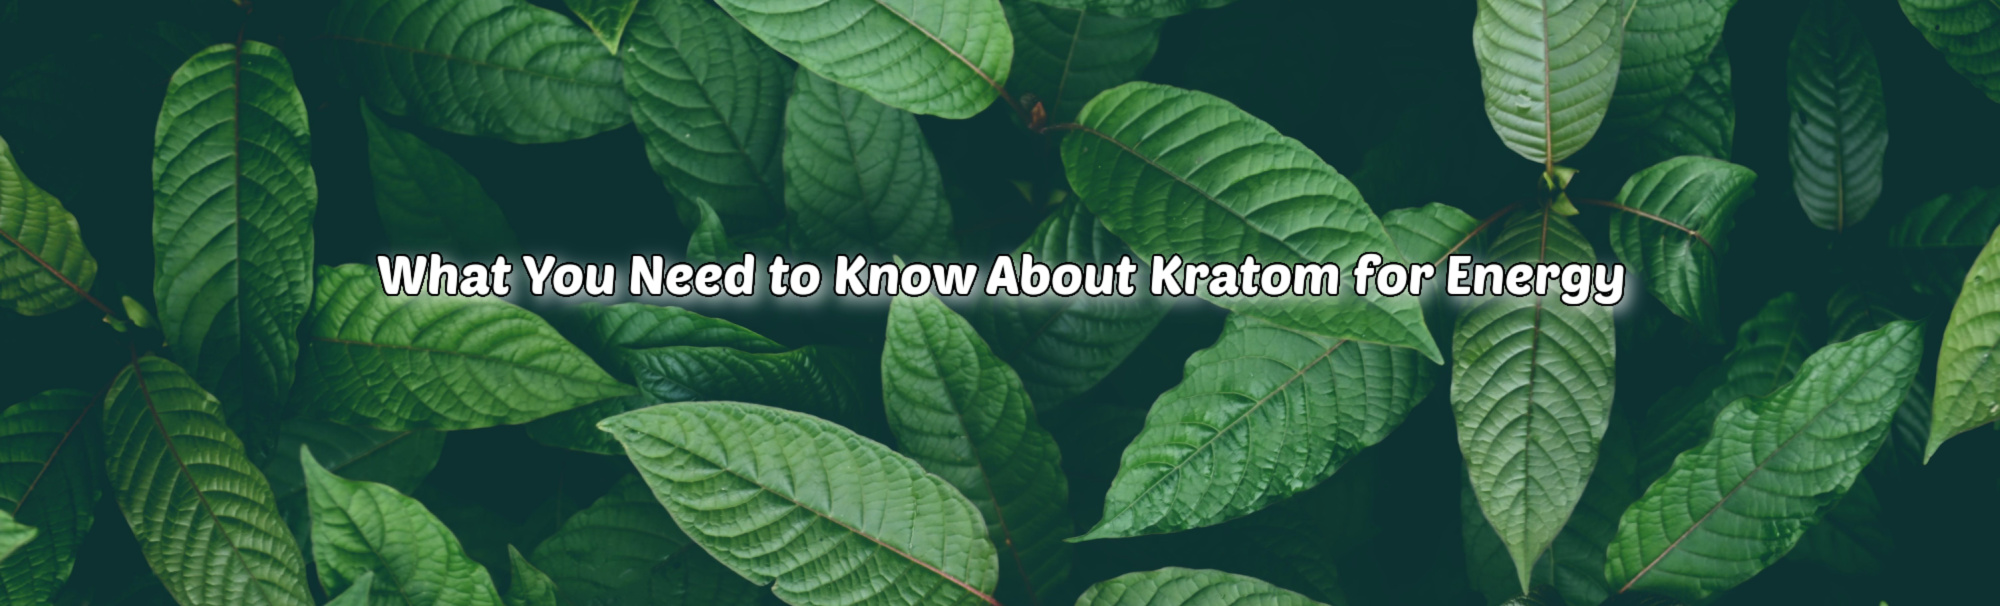 image of what you need to know about kratom for energy